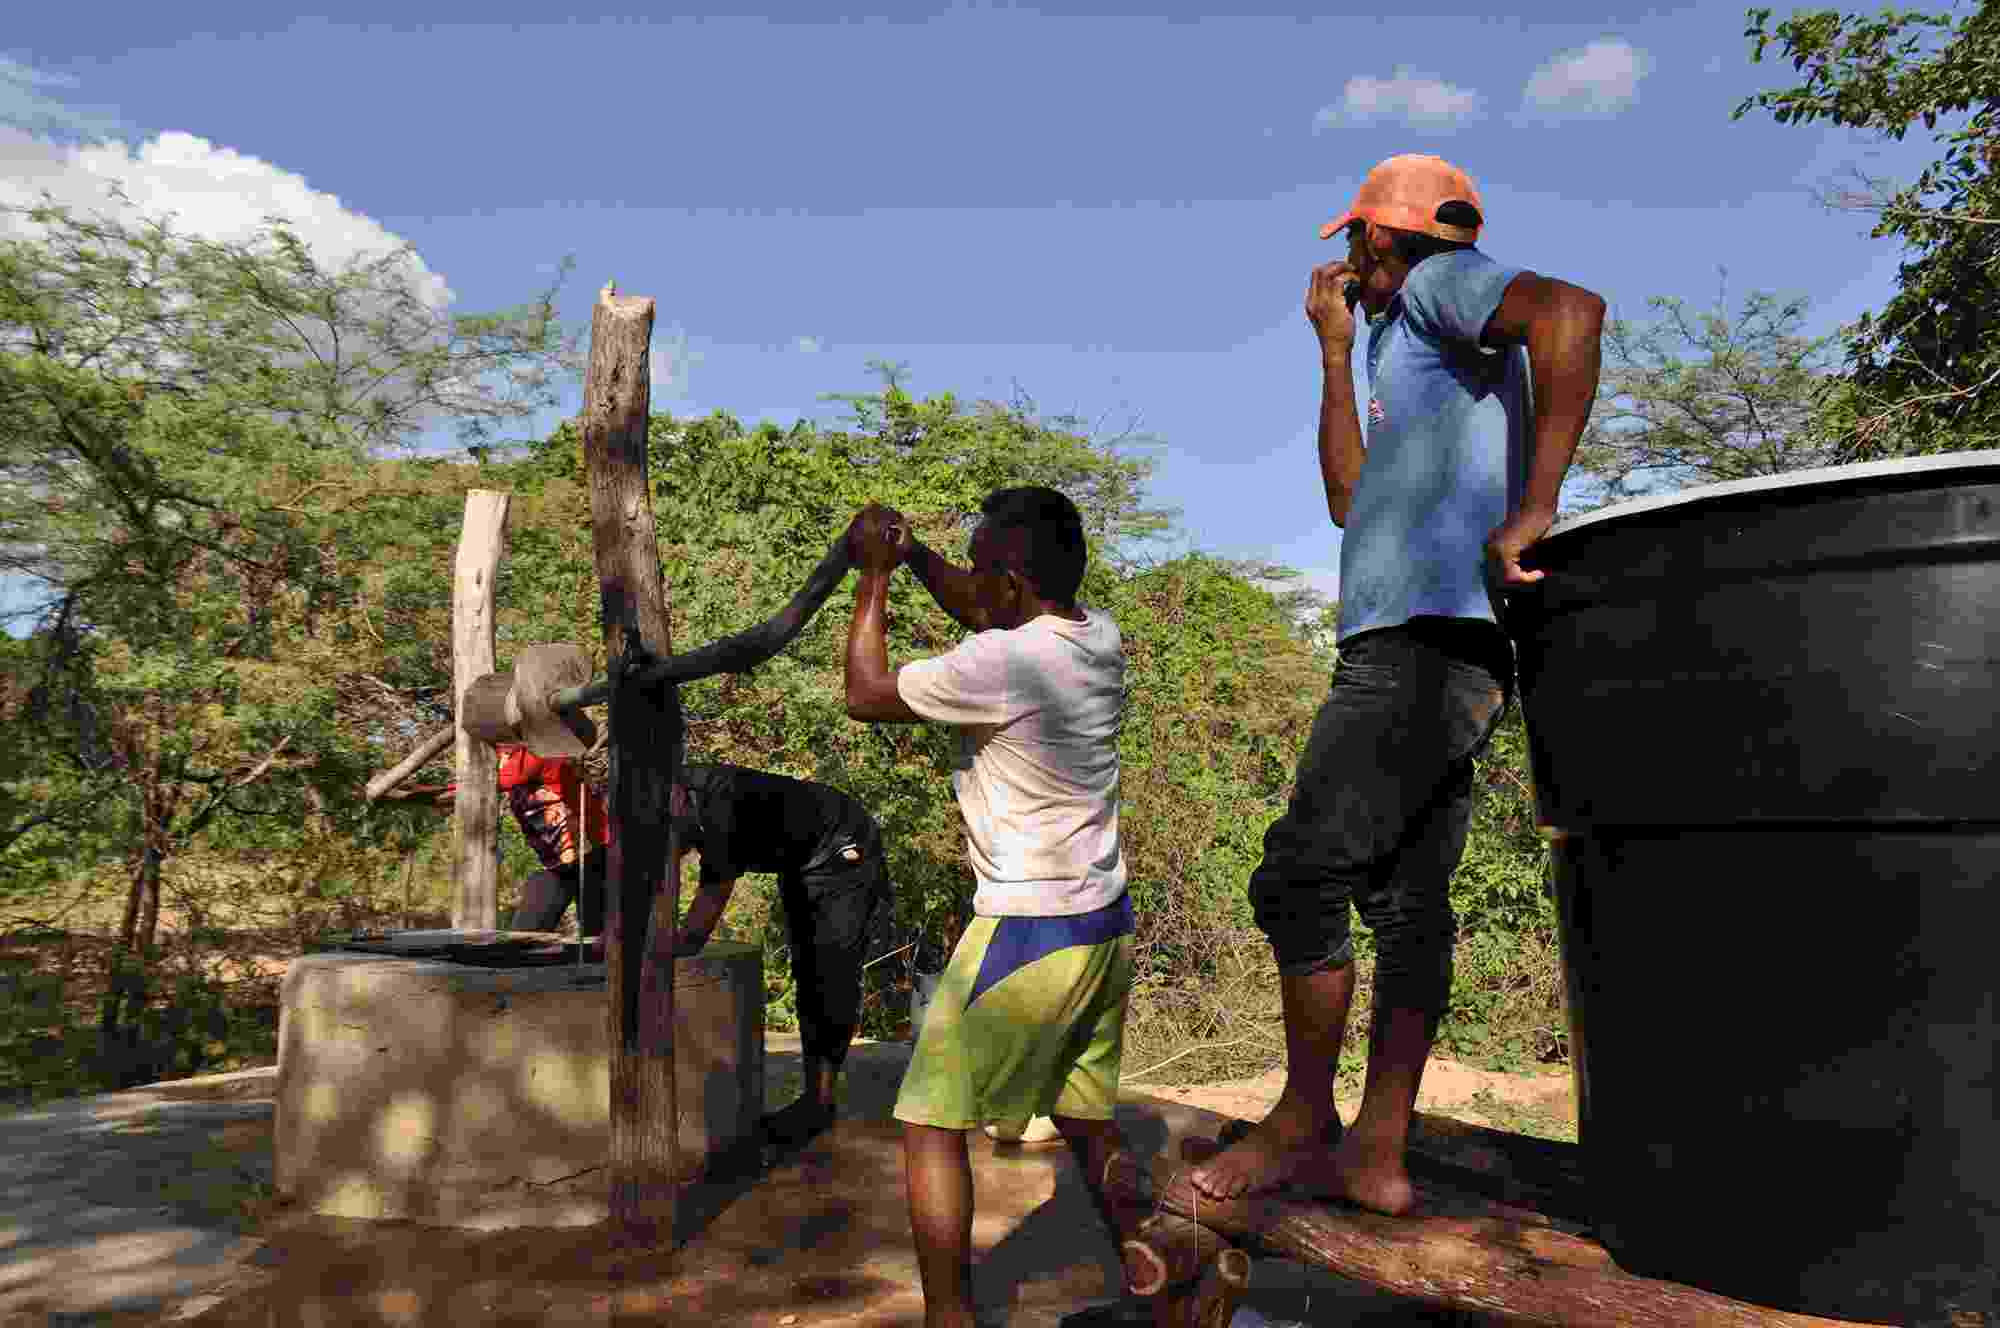 Wayuú community members using a water well to access clean drinking water, La Guajira, Colombia